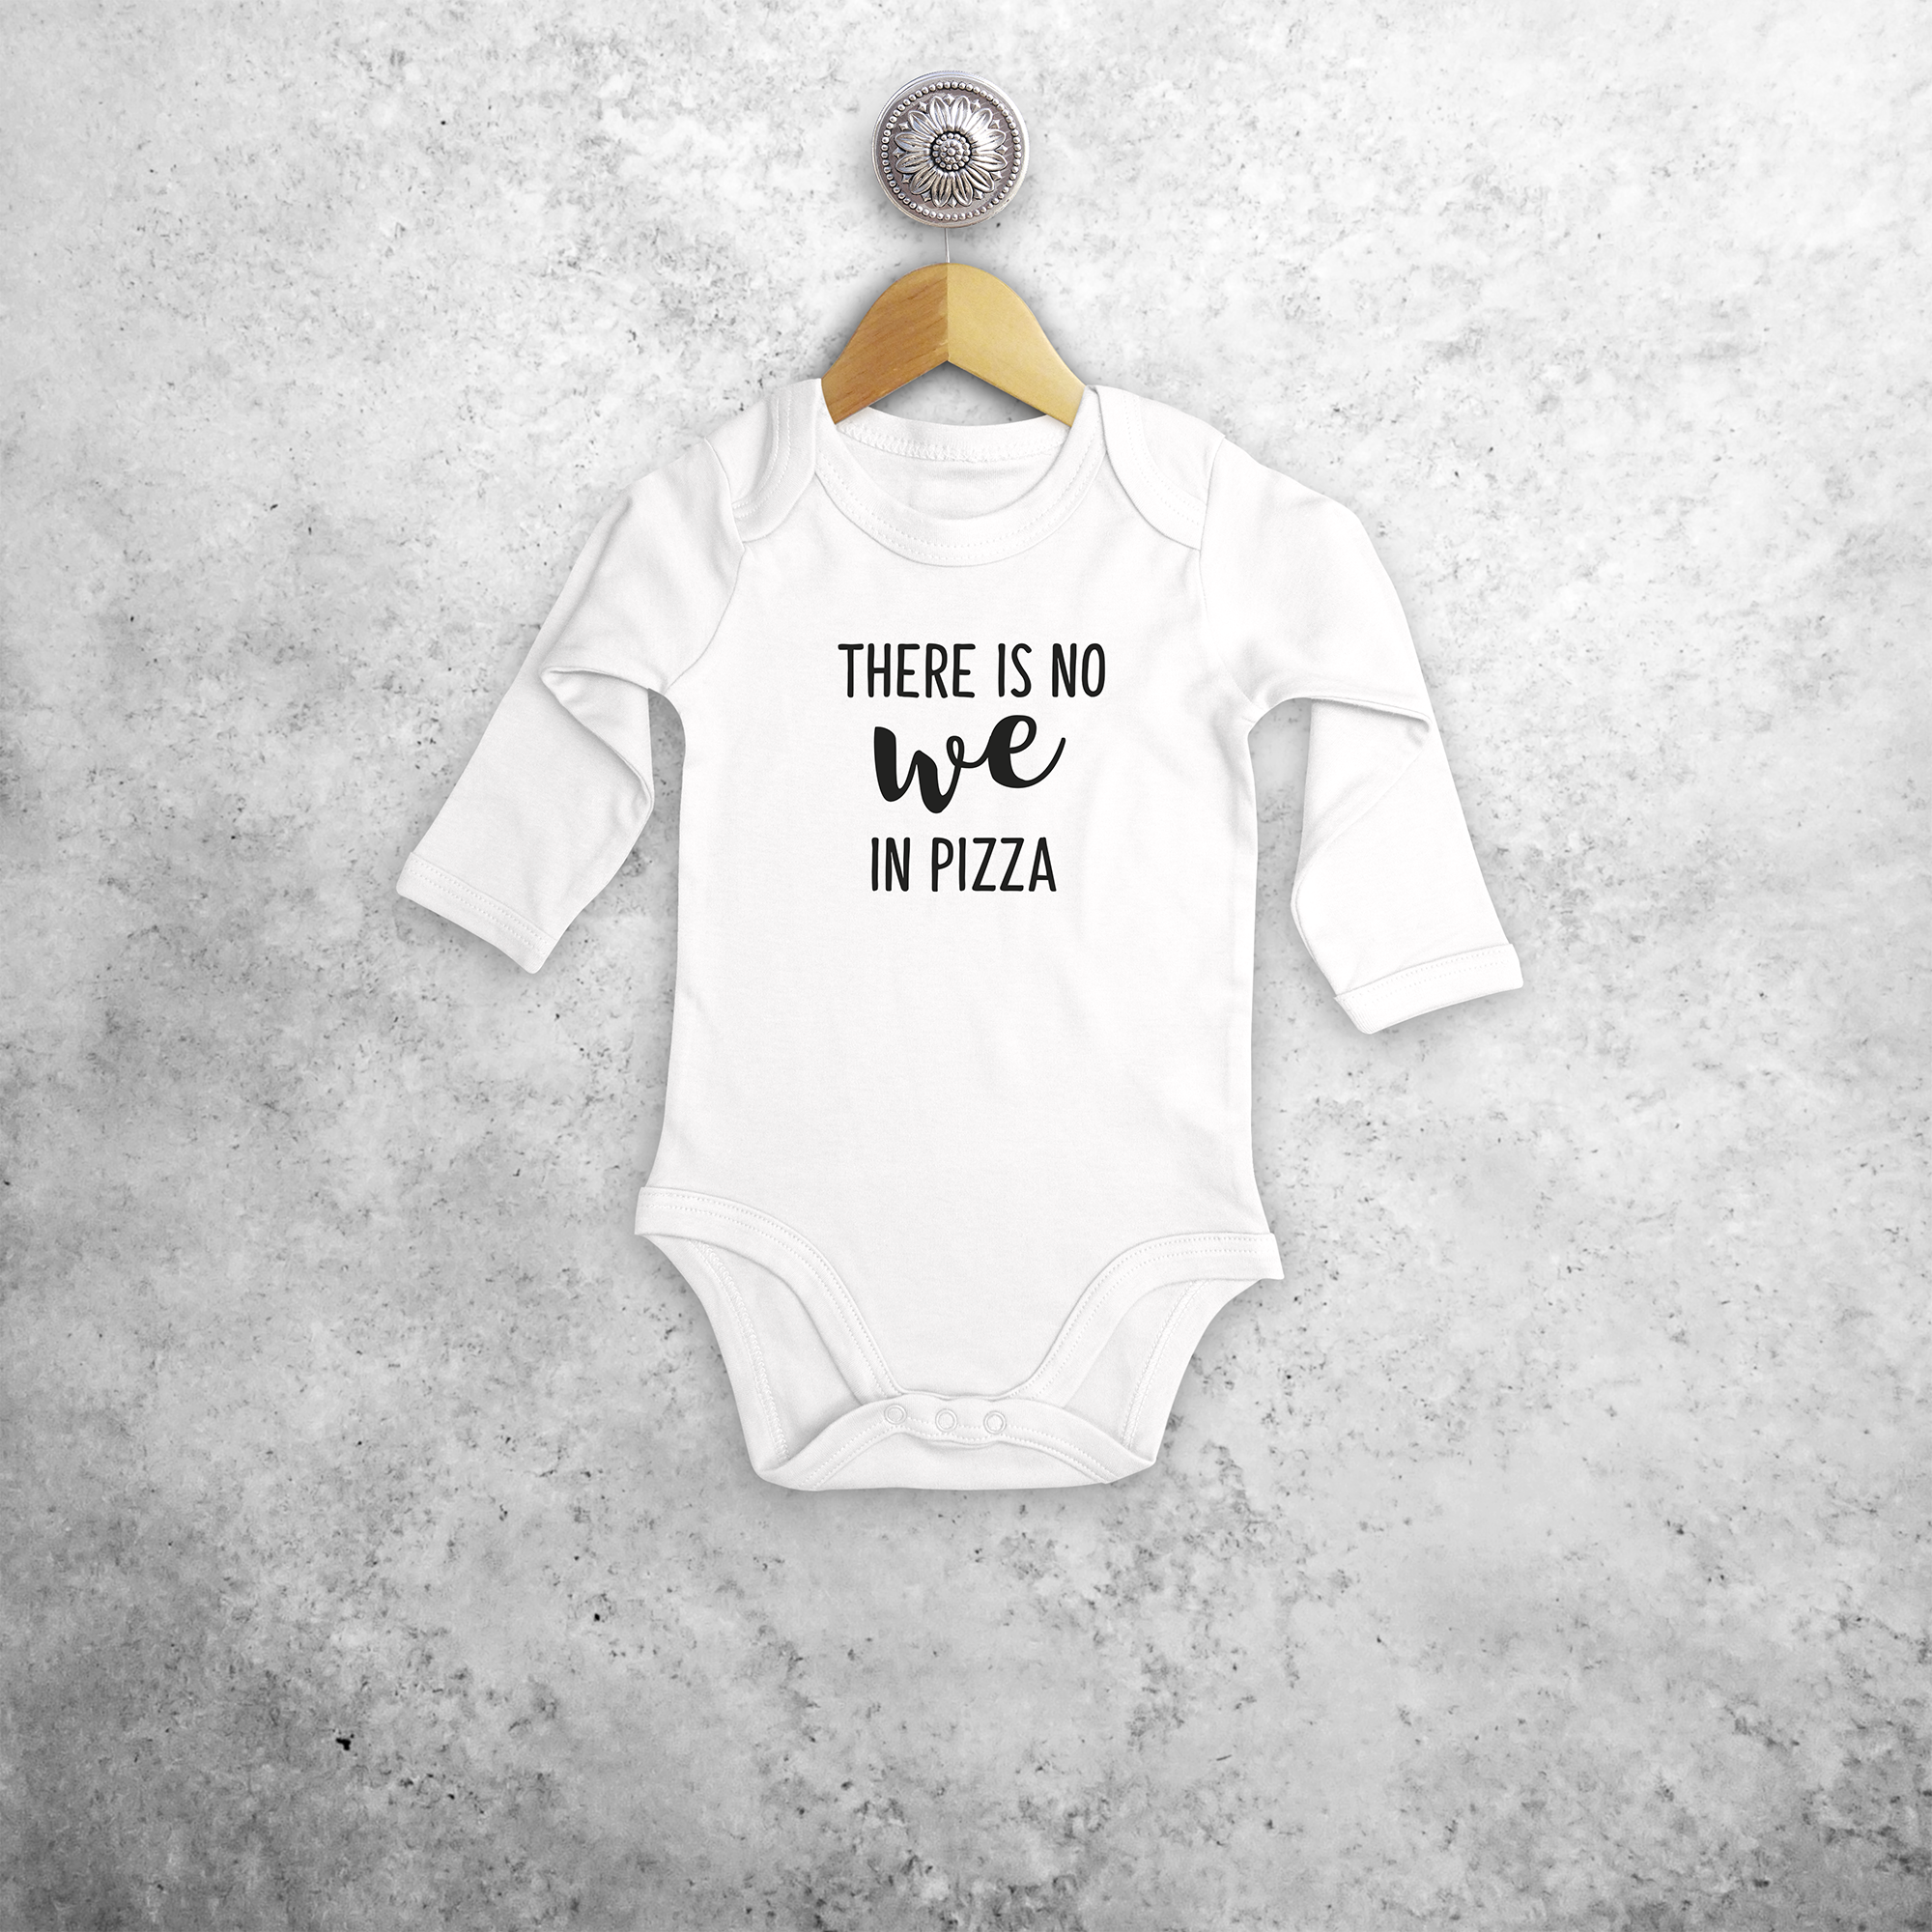 'There is no we in pizza' baby longsleeve bodysuit